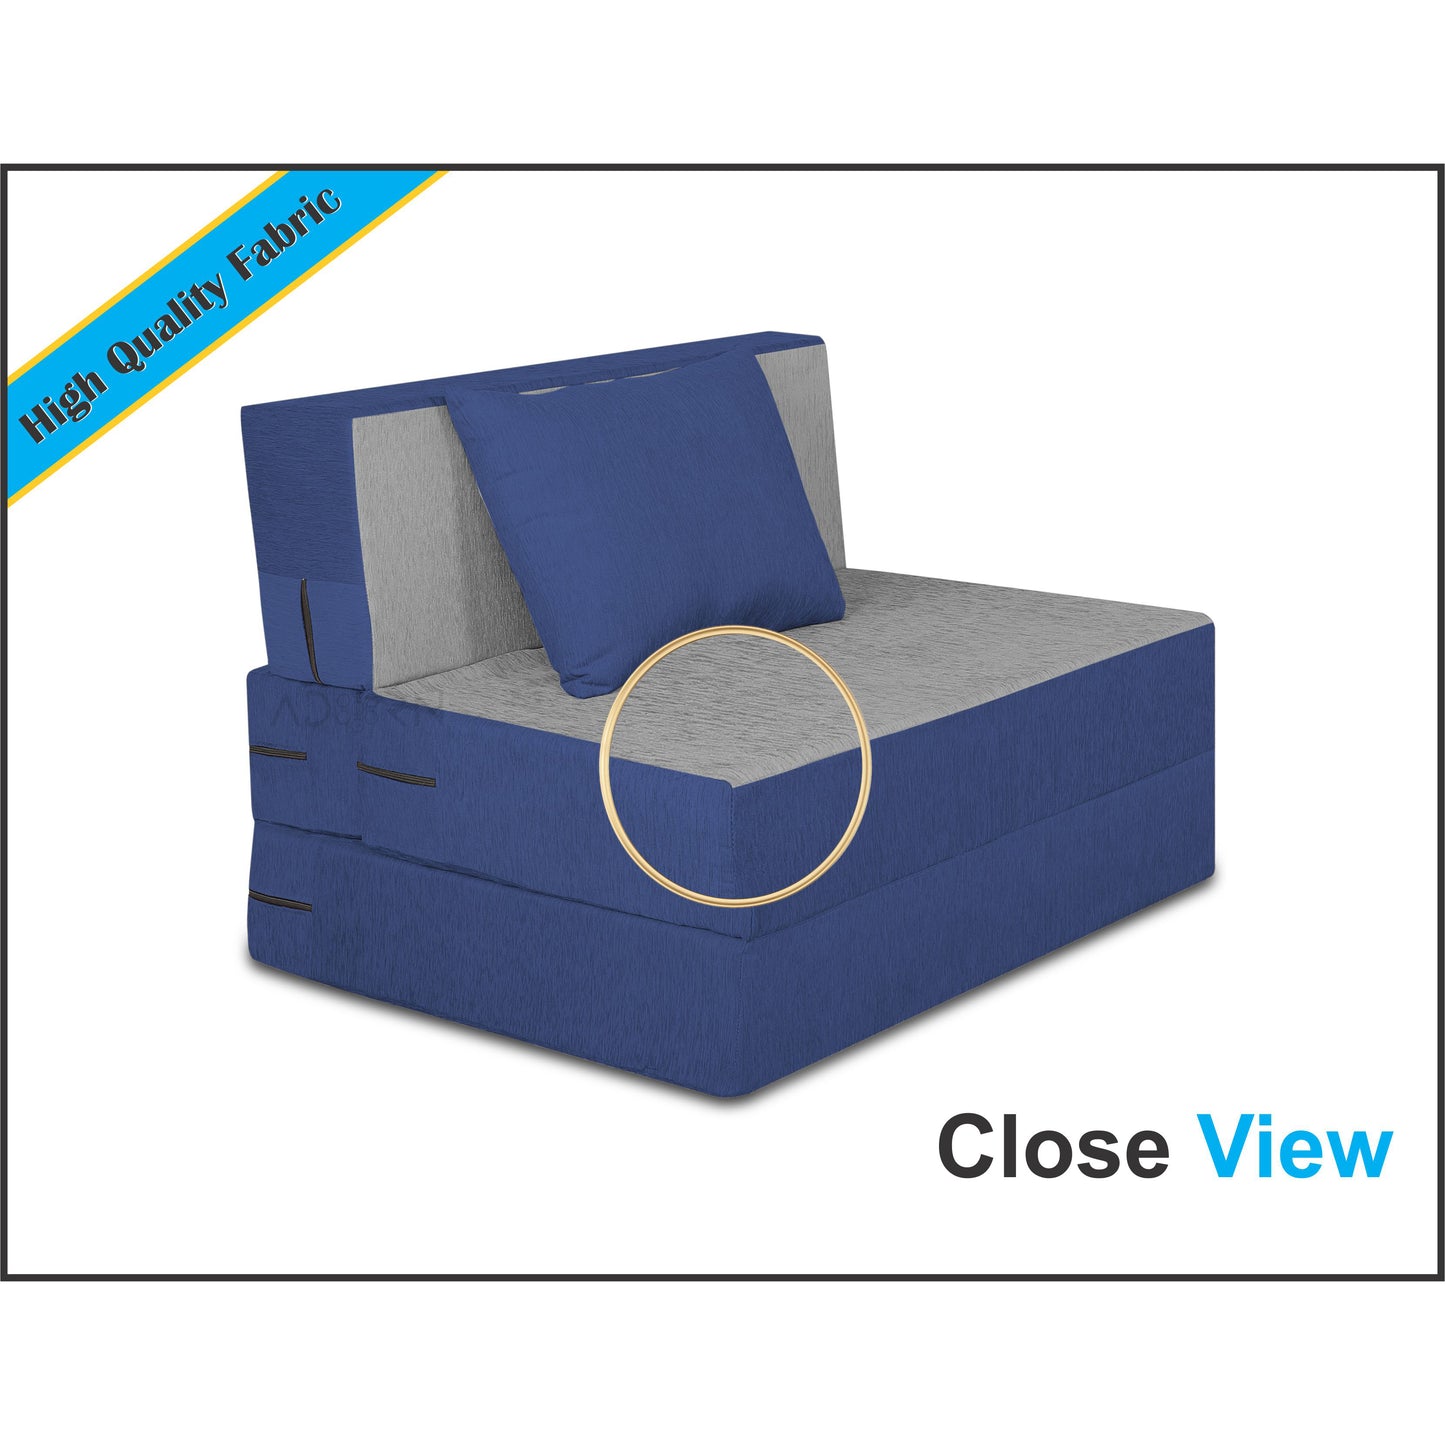 Adorn India Easy Single Seater Sofa Bed 3'x6' (Blue and Grey)